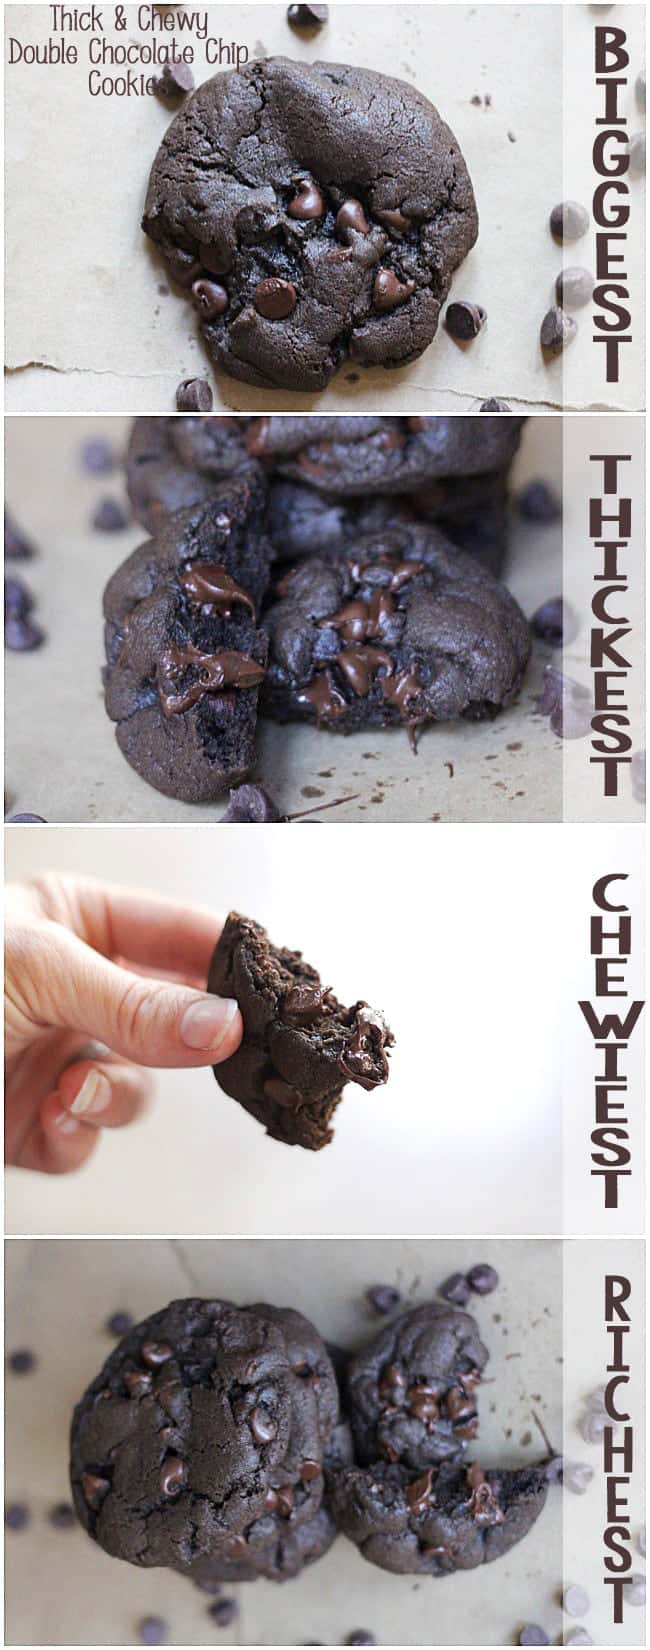 How to make the thickest and chewiest chocolate chocolate chip cookies - Click here to get step by step and all the tips and tricks for super thick and chewy cookies!